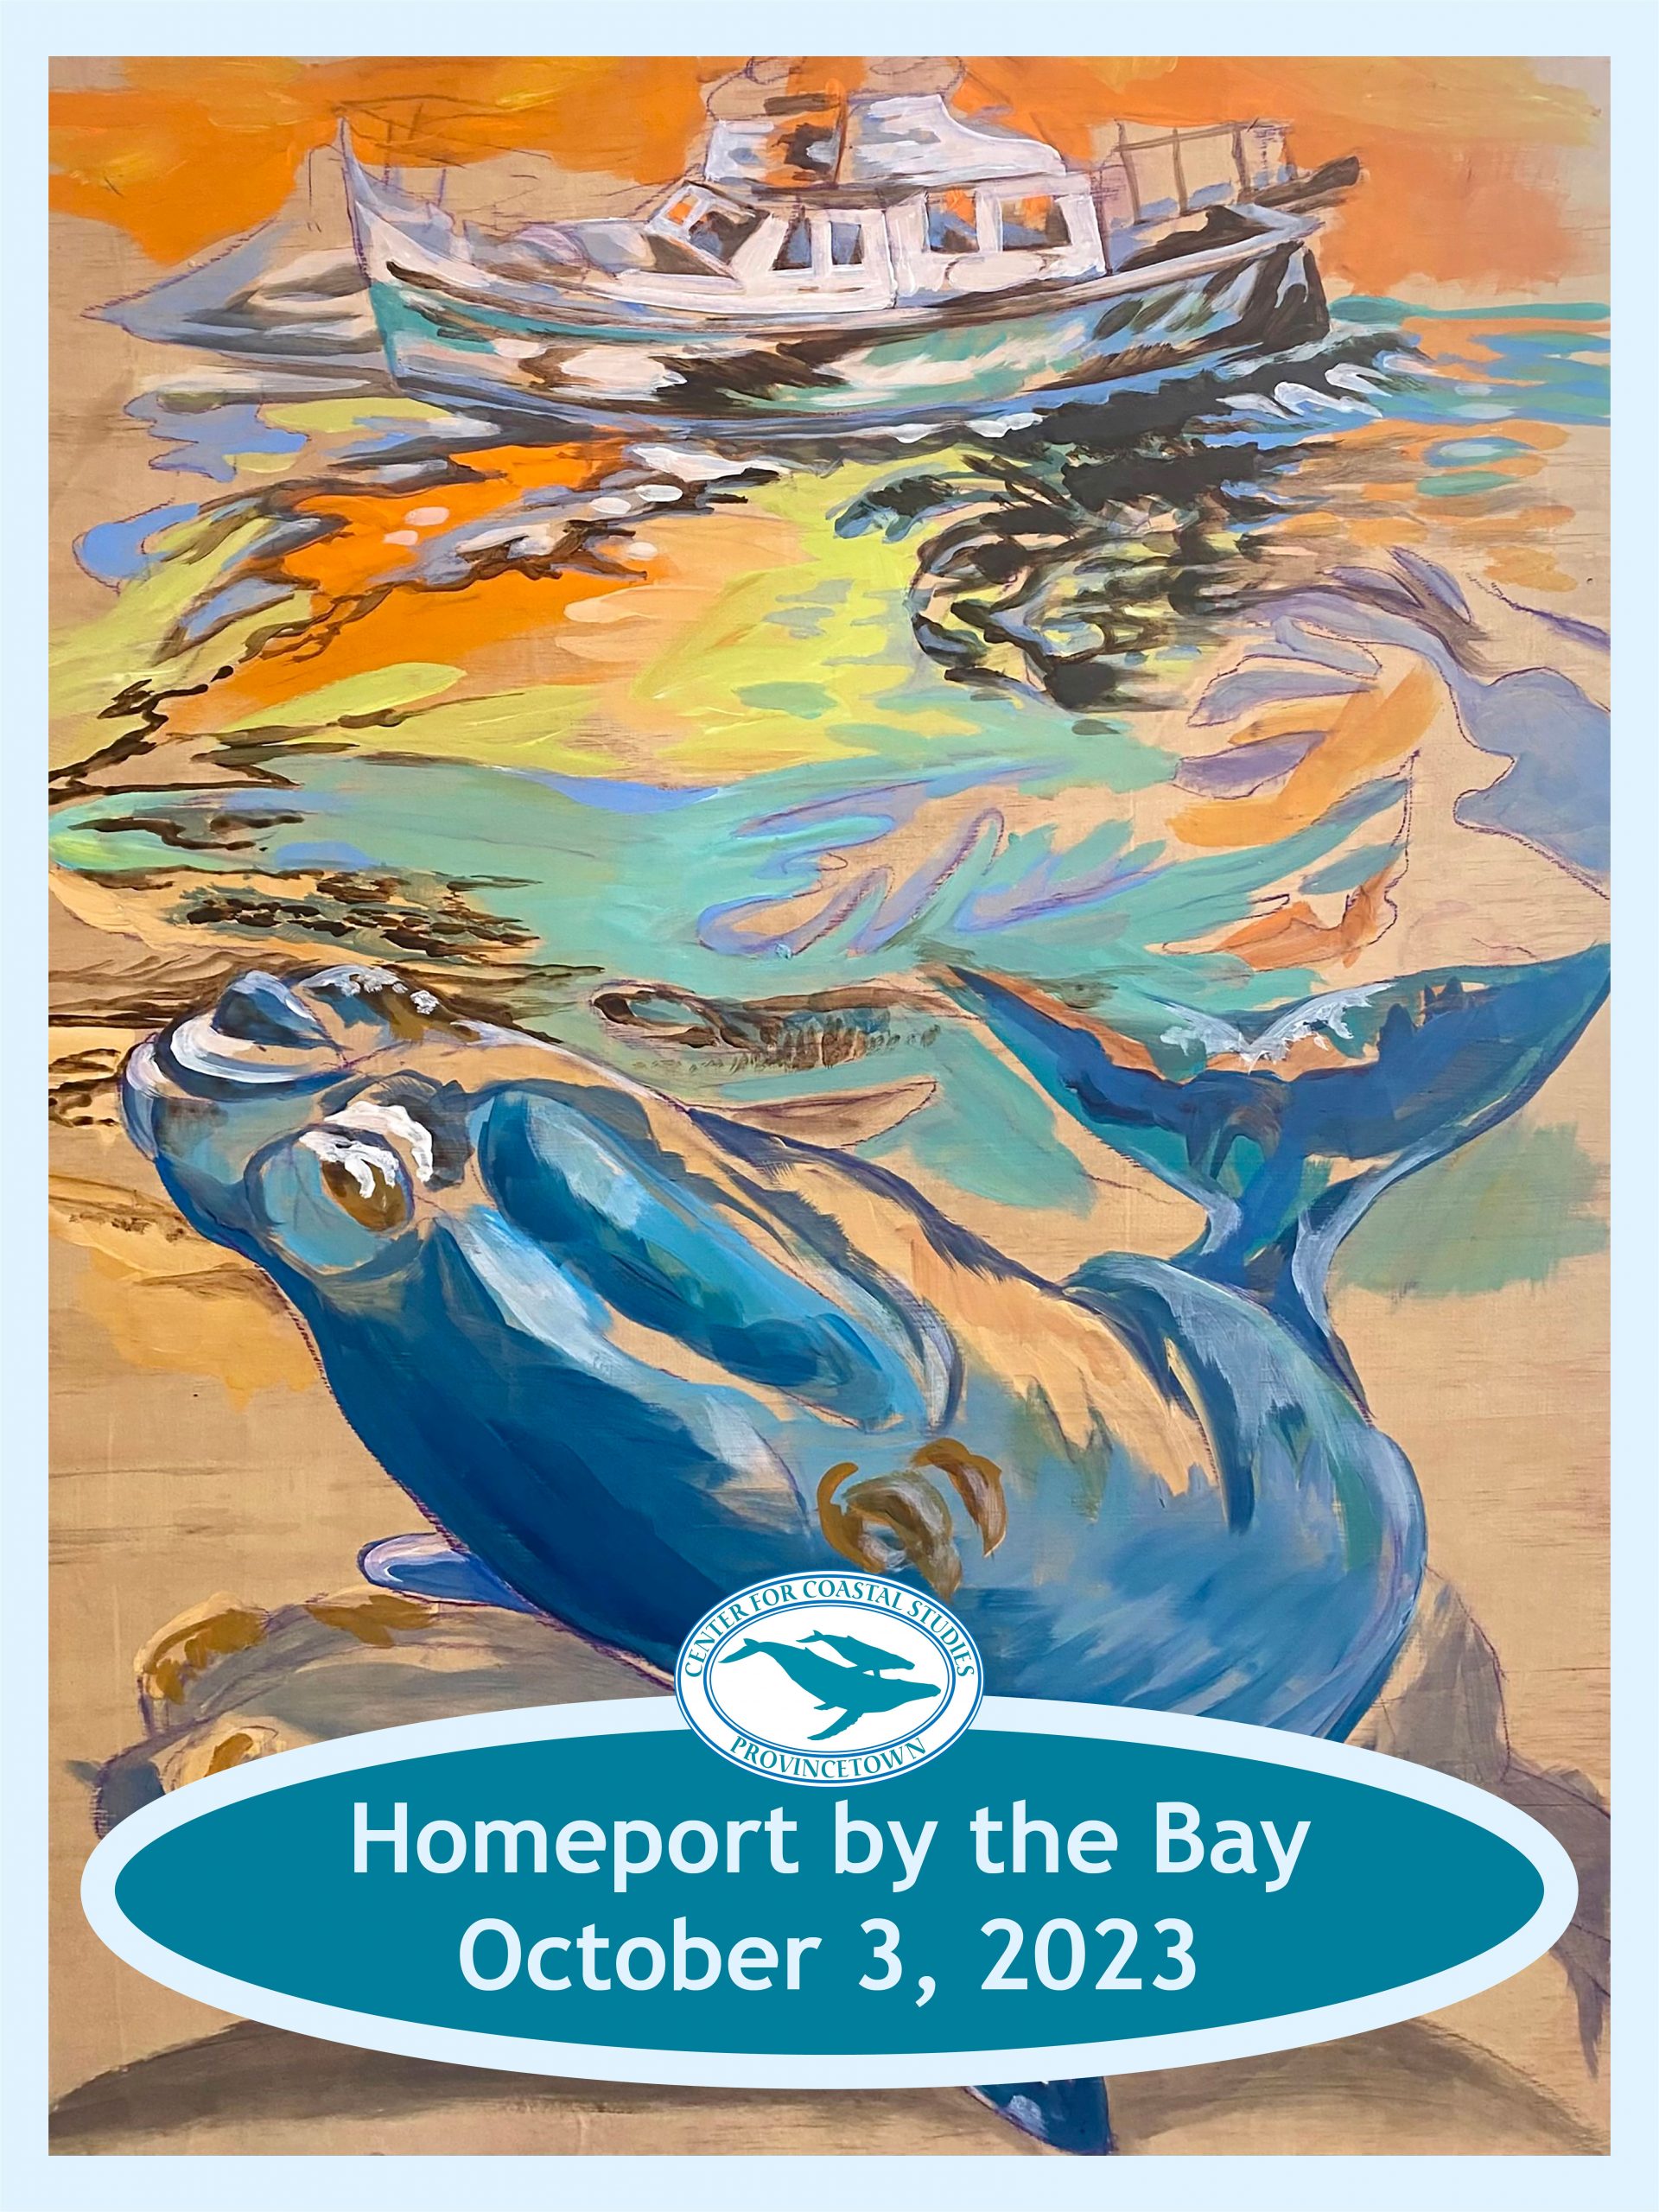 Homeport by the Bay